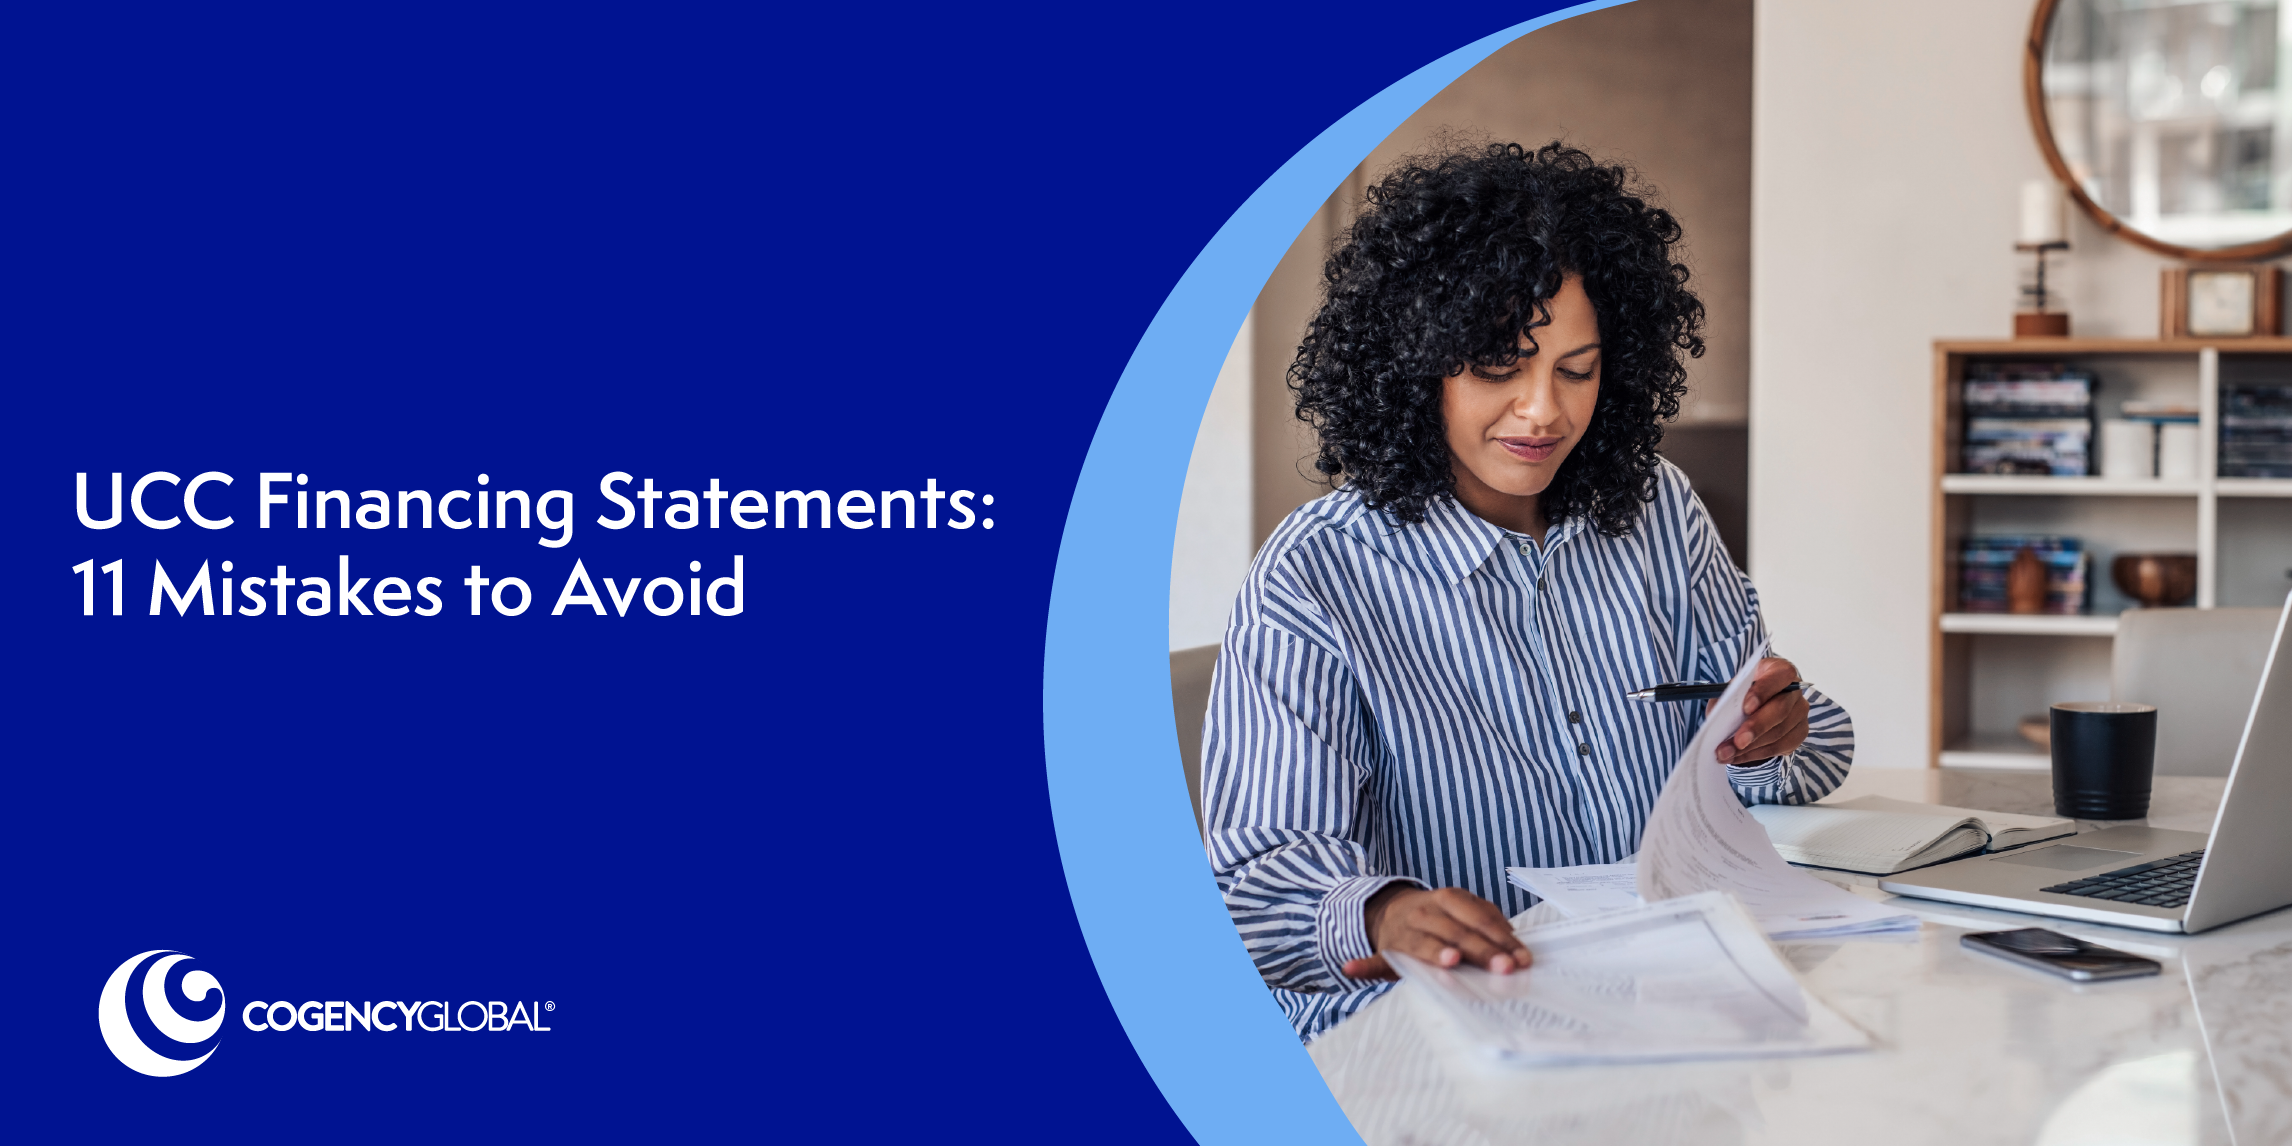 UCC Financing Statements: 11 Mistakes to Avoid